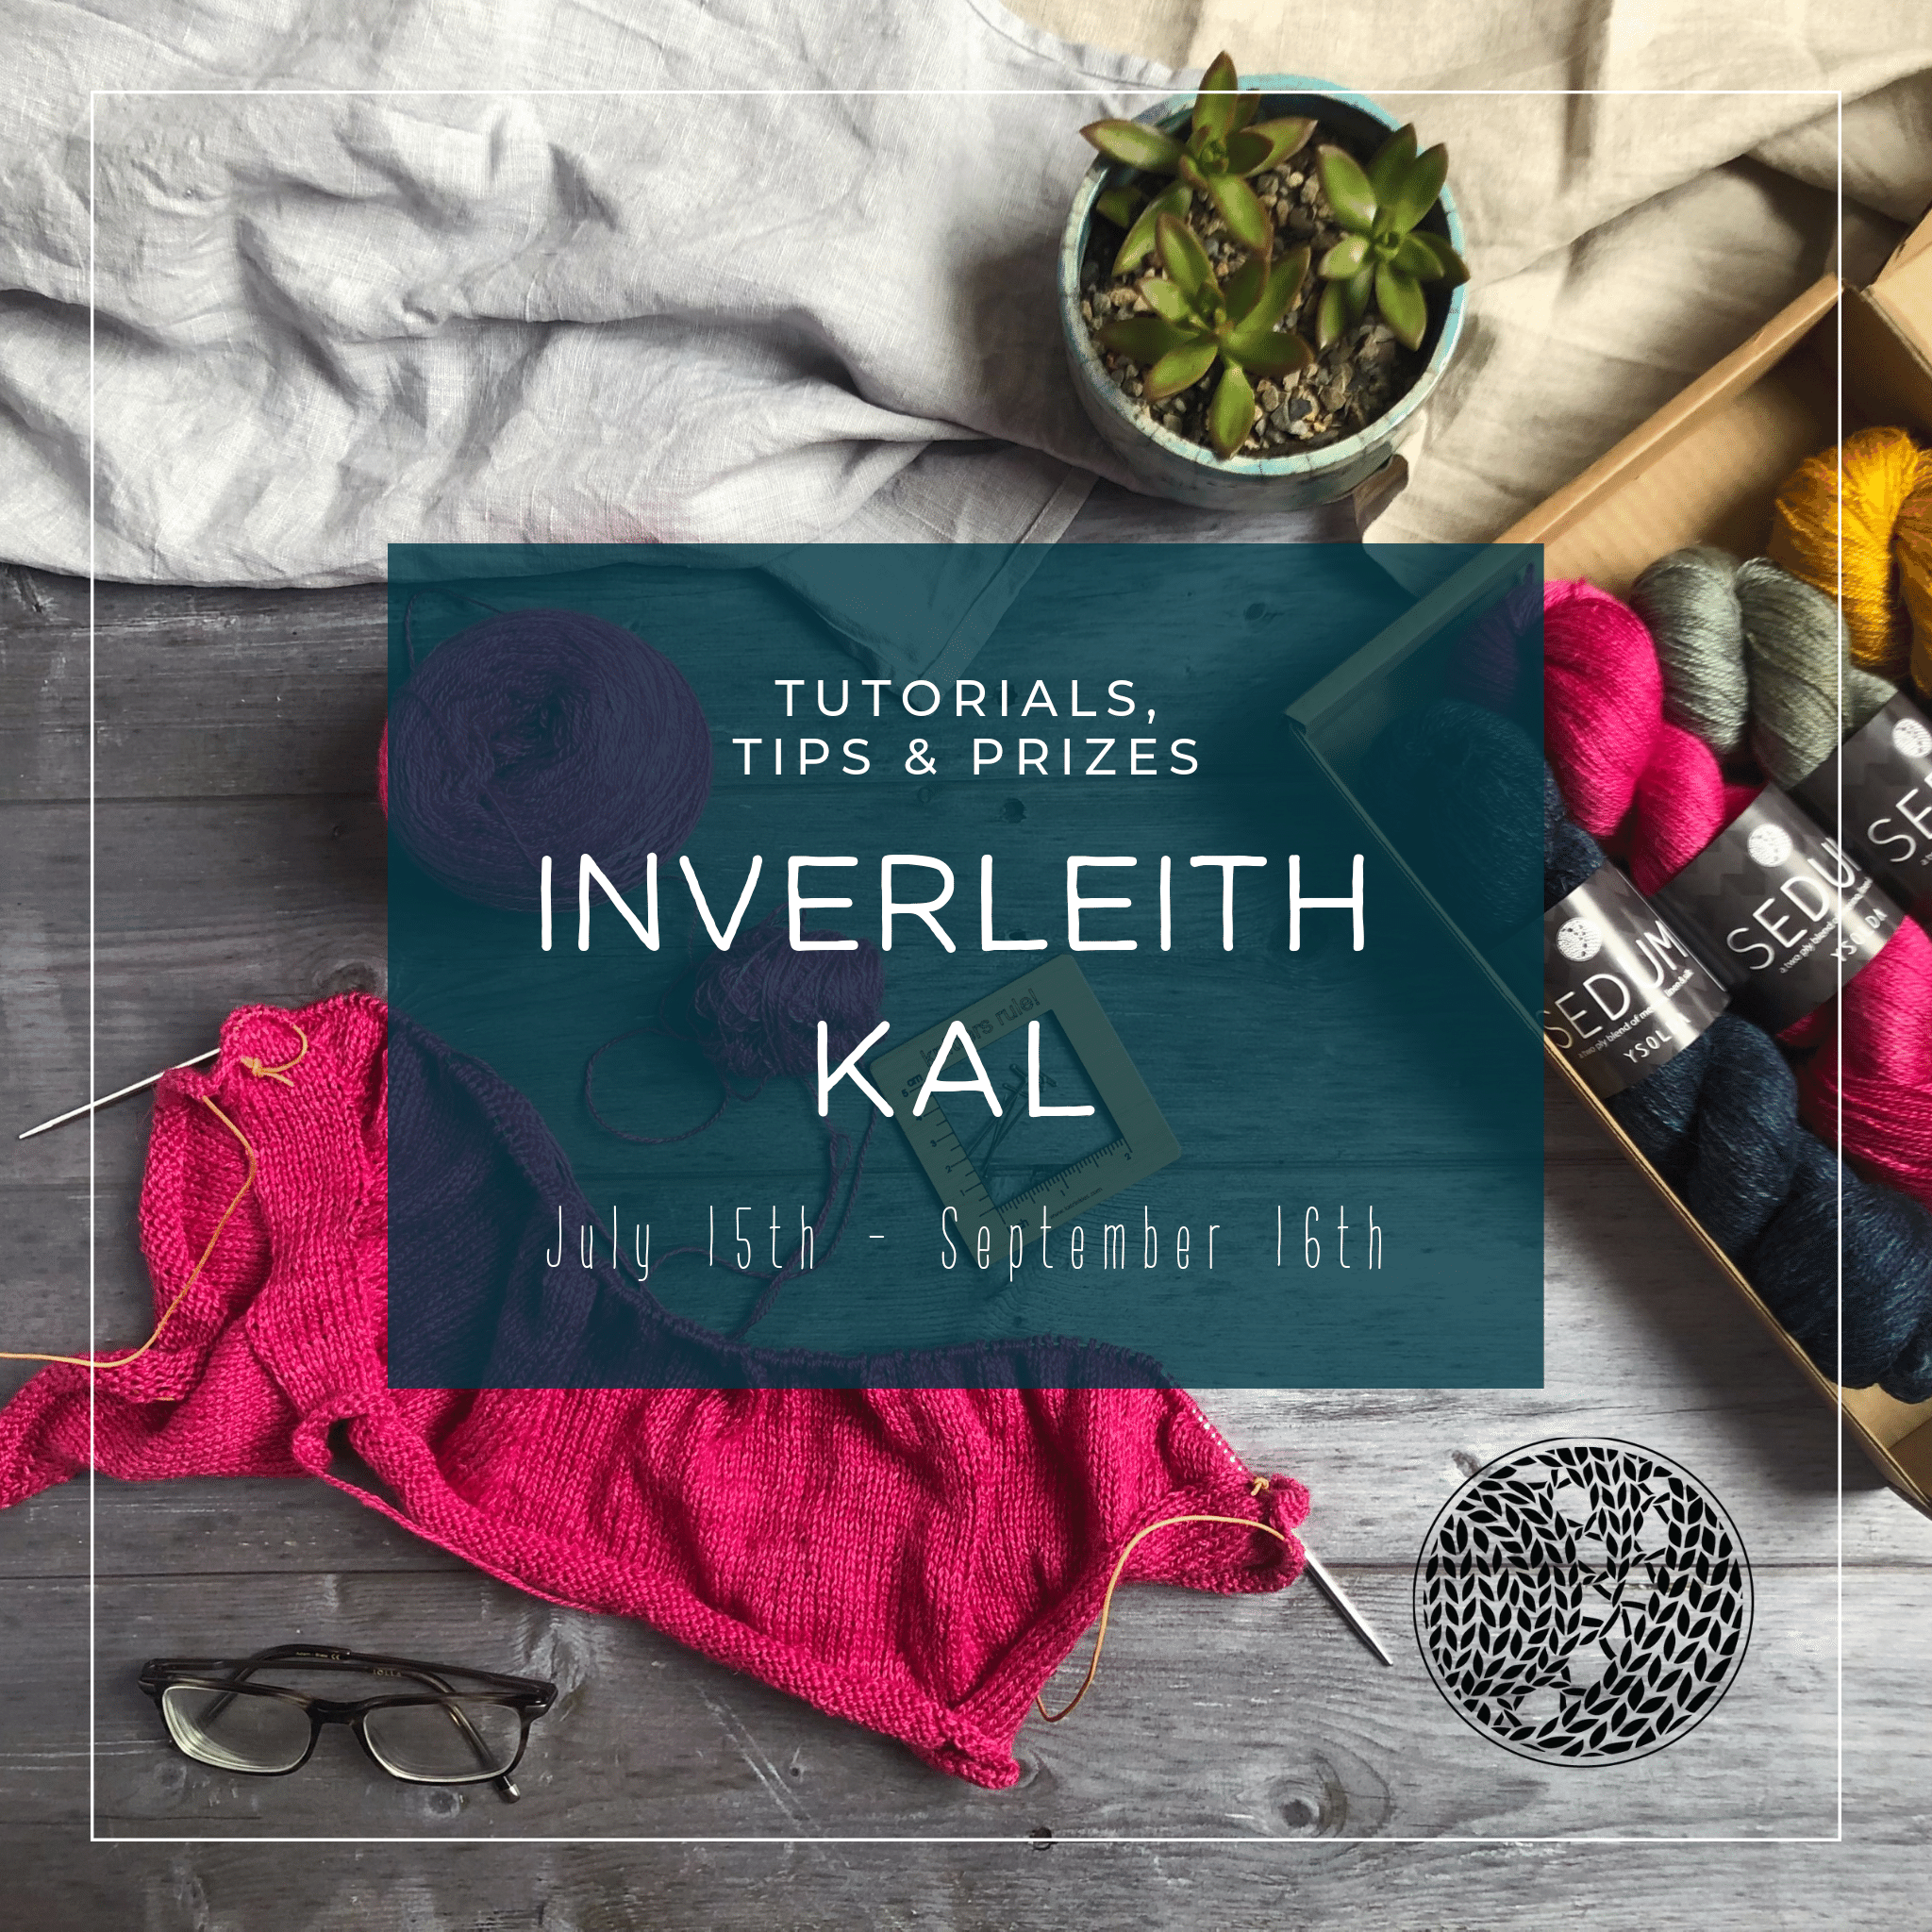 graphic showing an inverleith in progress with the text "tutorials, tips and prizes, Inverleith kal, July 15th - September 16th"